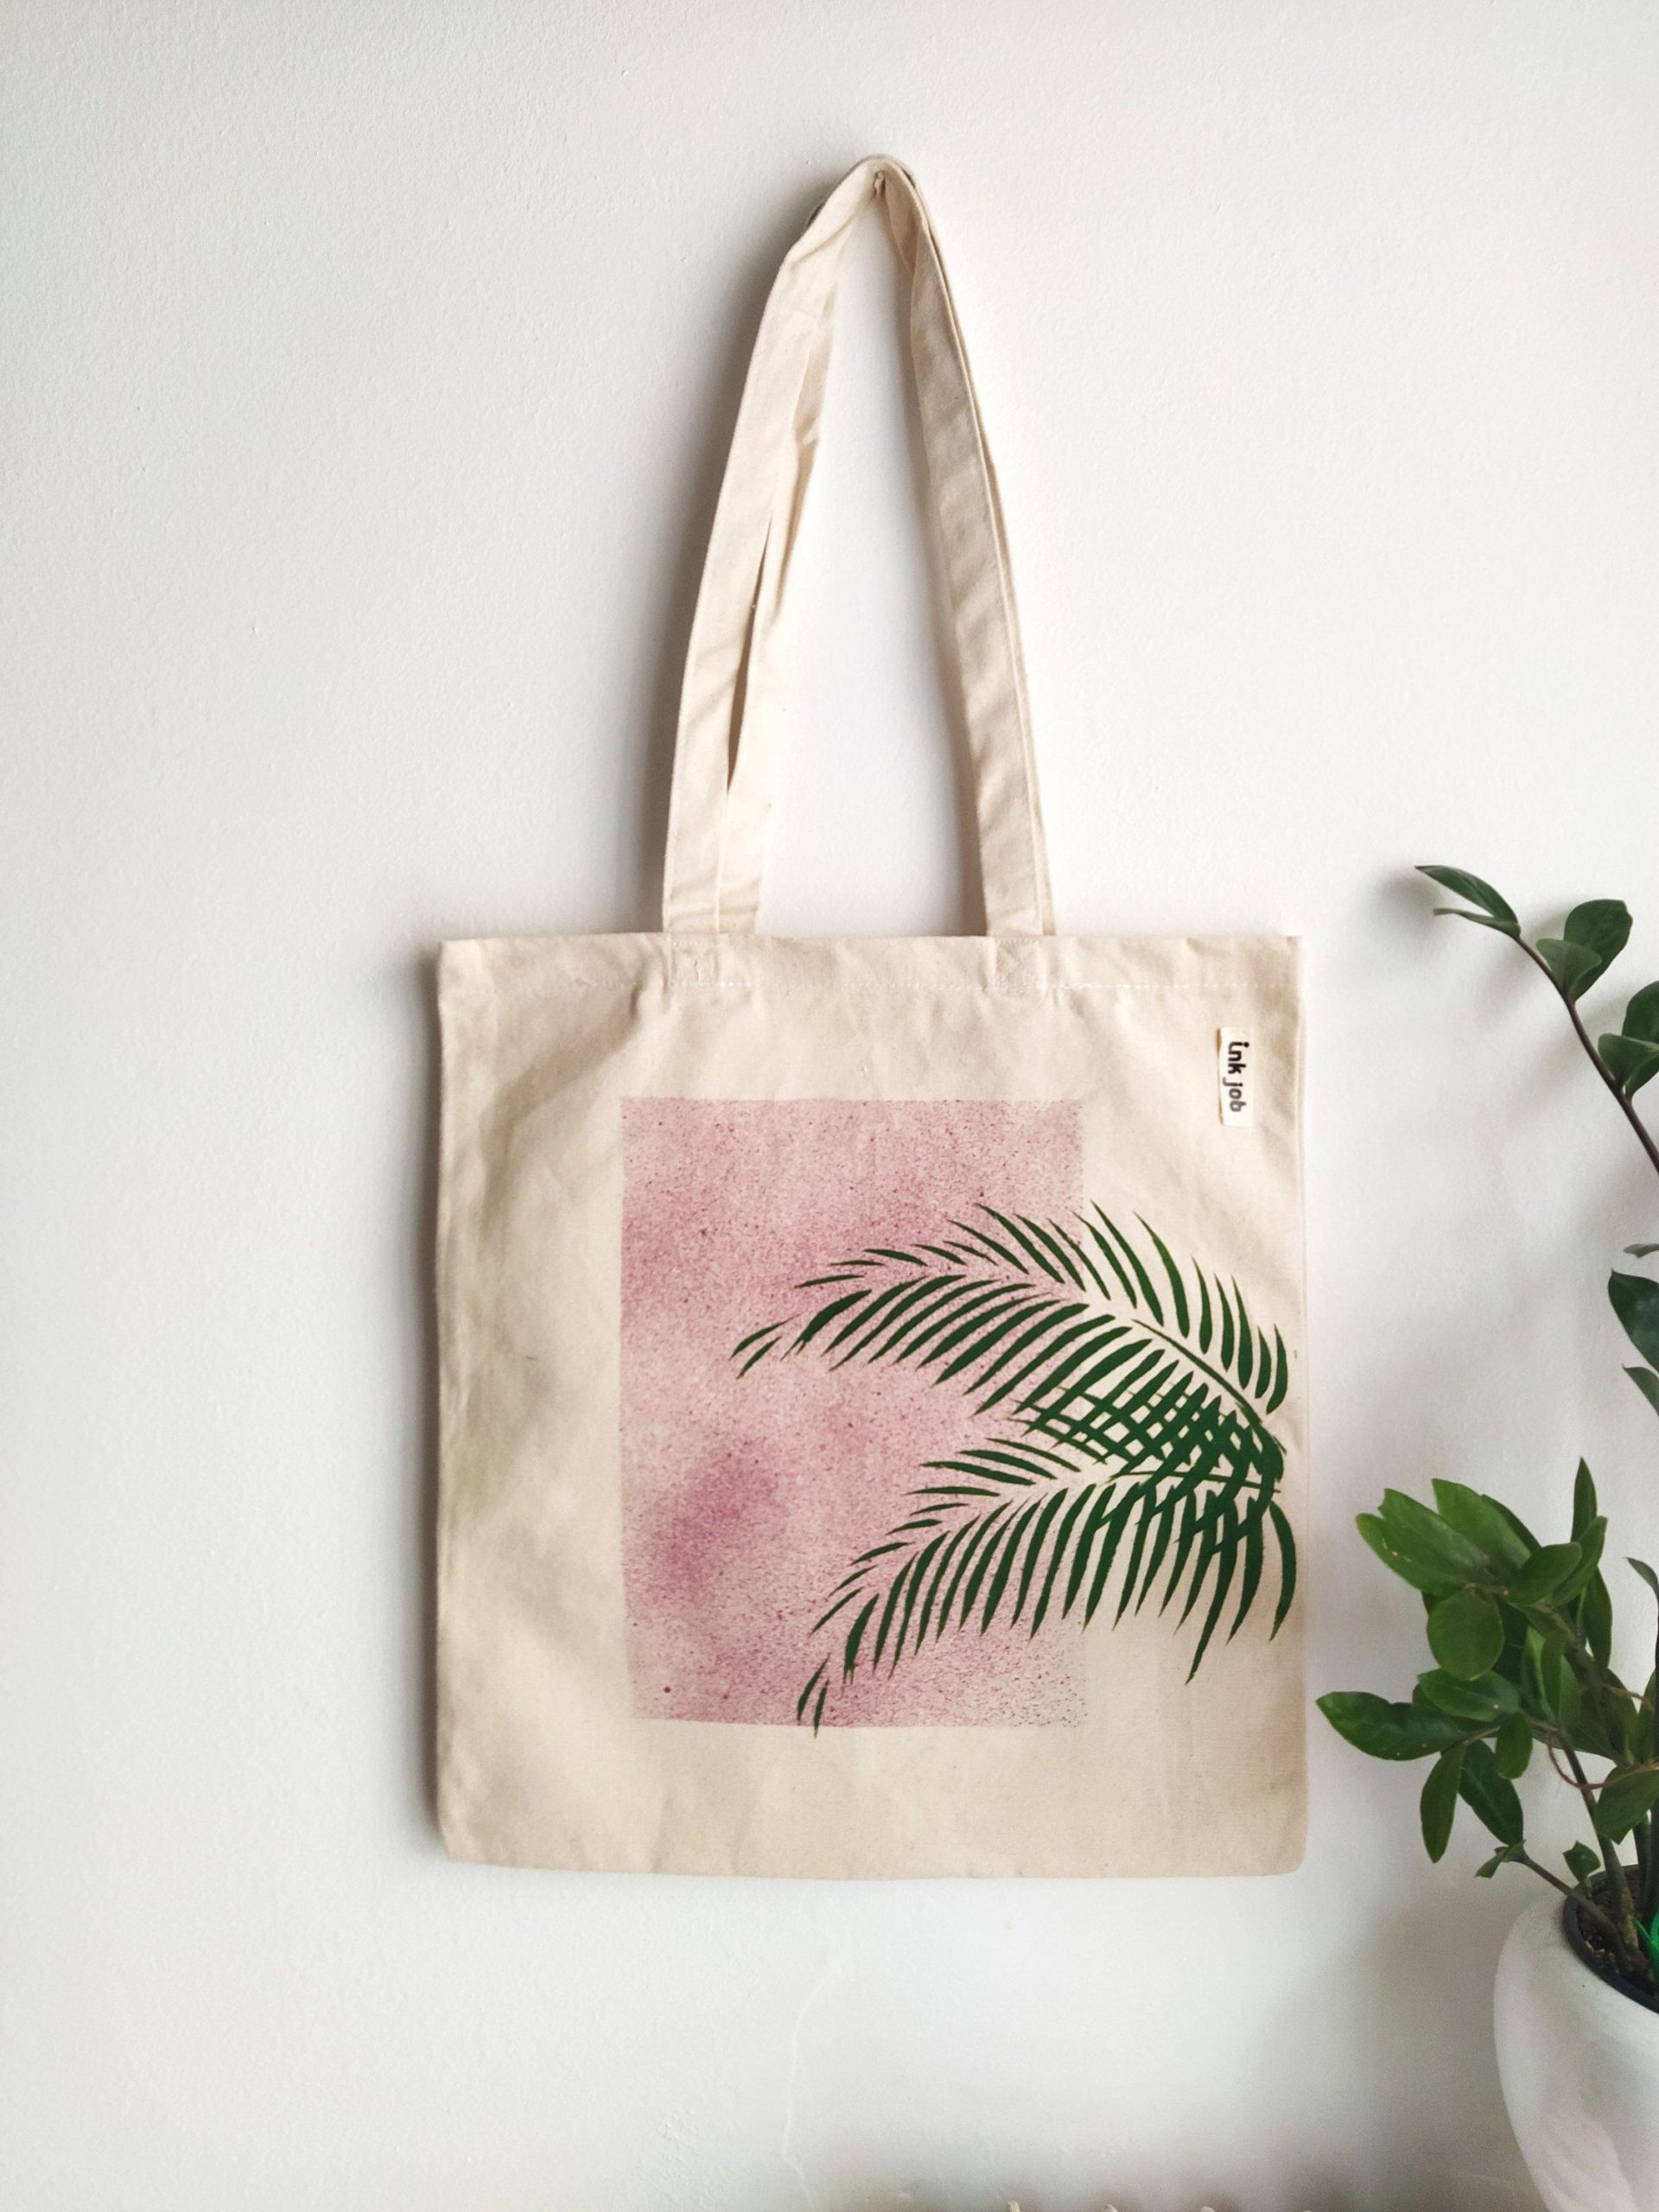 How to print on a canvas bag